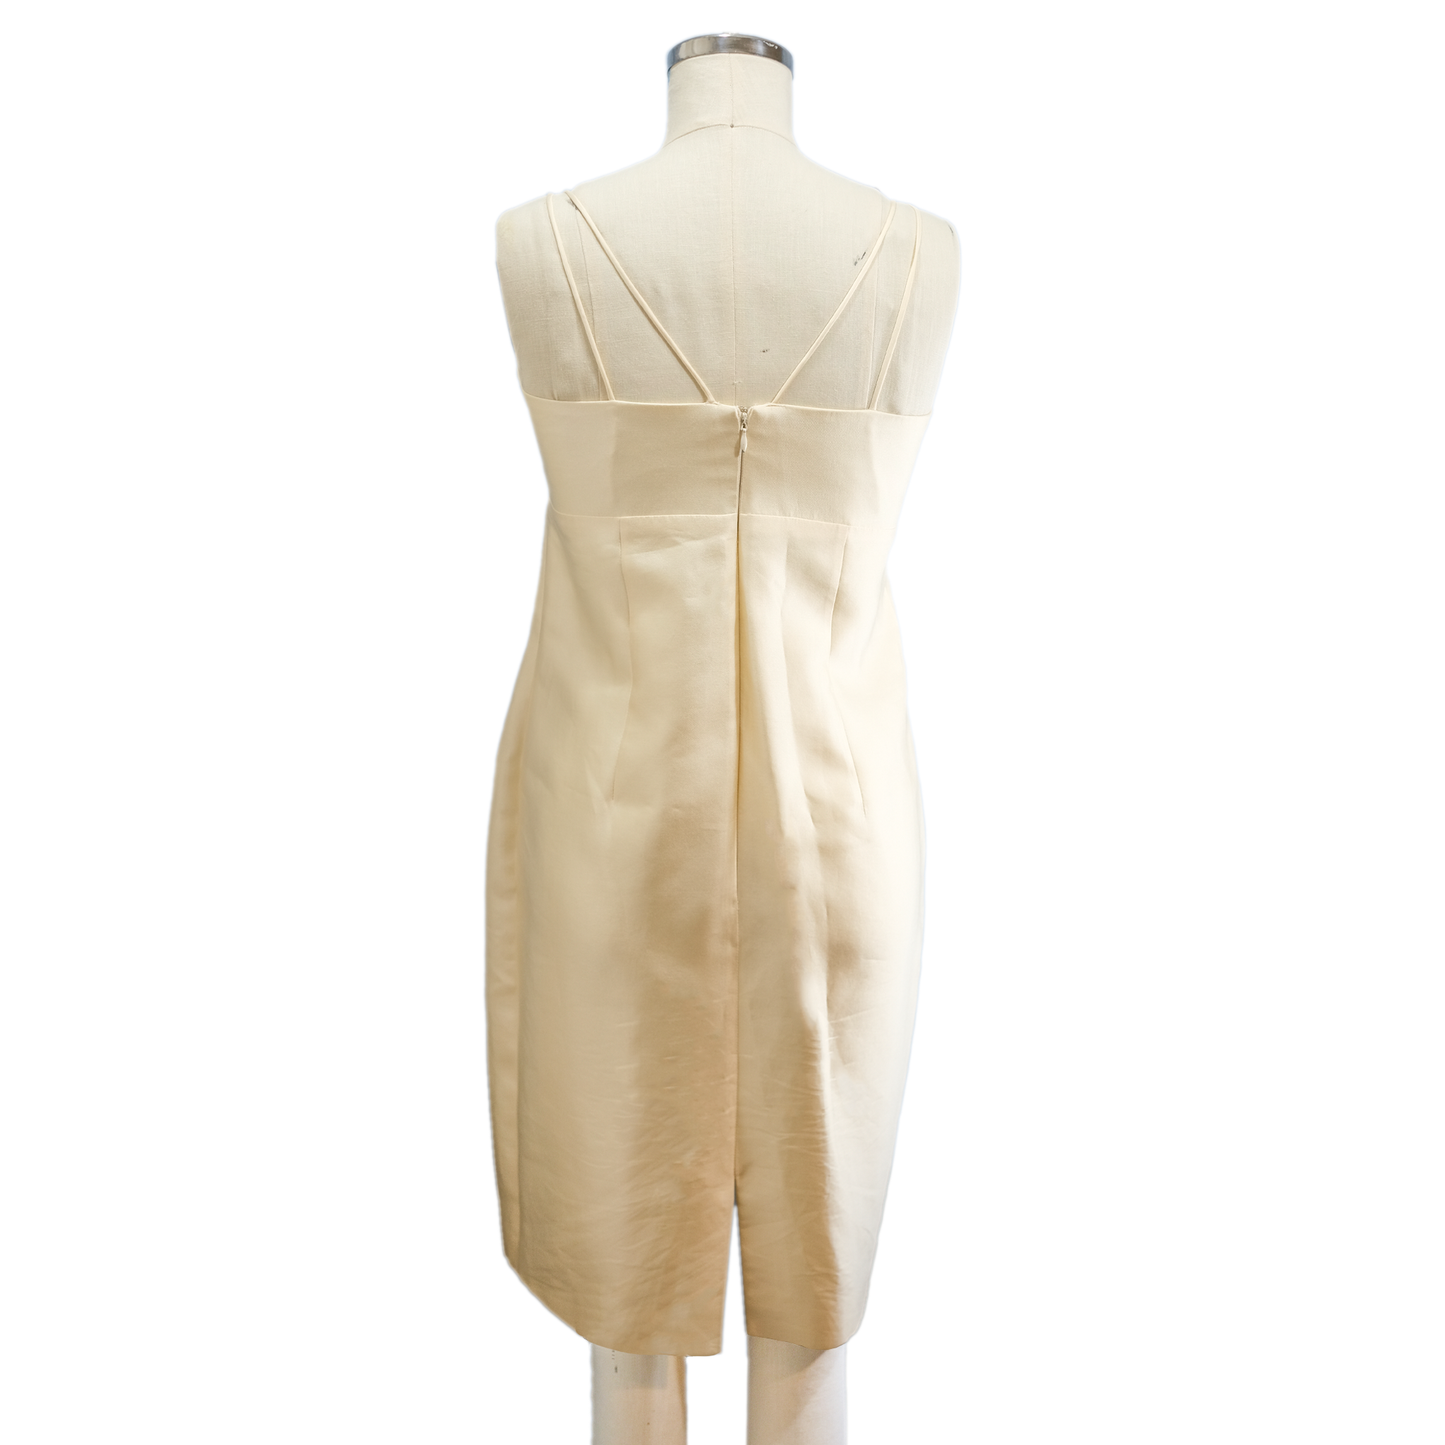 Pre-owned Hartly Westwood - Cream Silk Dress and Jacket Set - Size Medium - Pre-owned